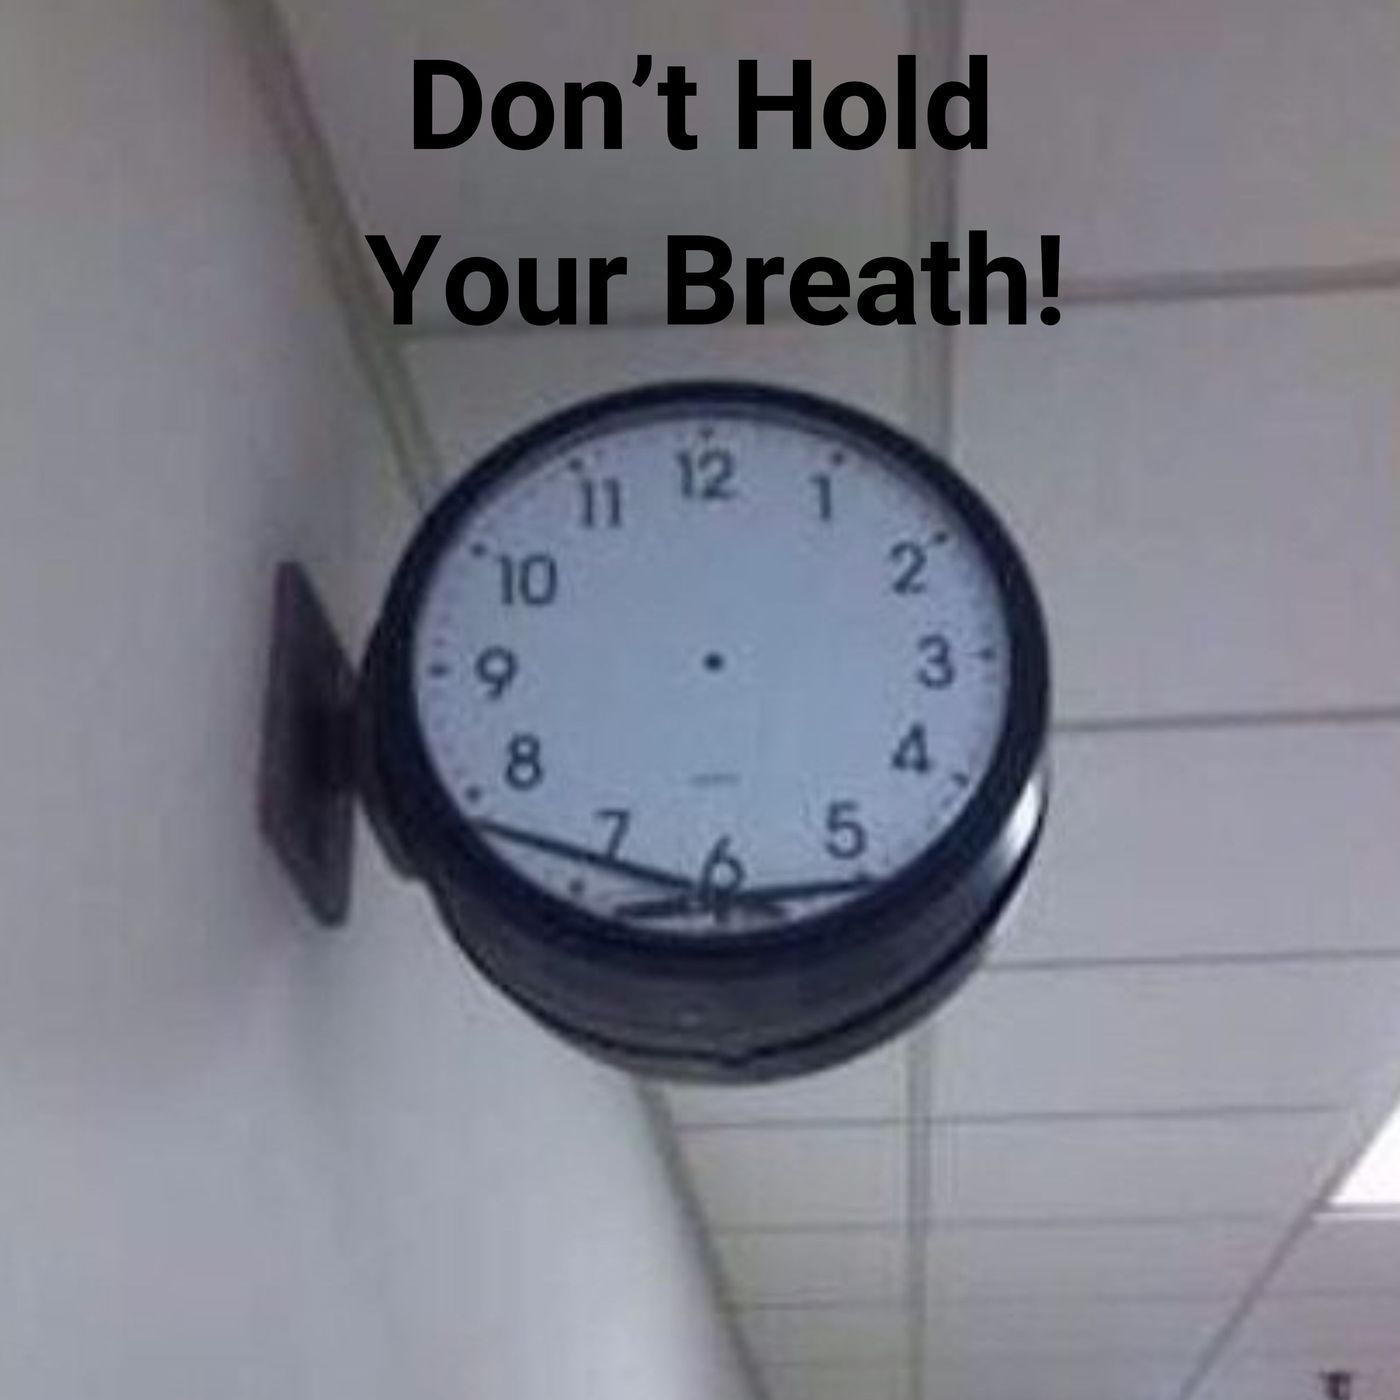 119 Don't Hold Your Breath (Idiom)